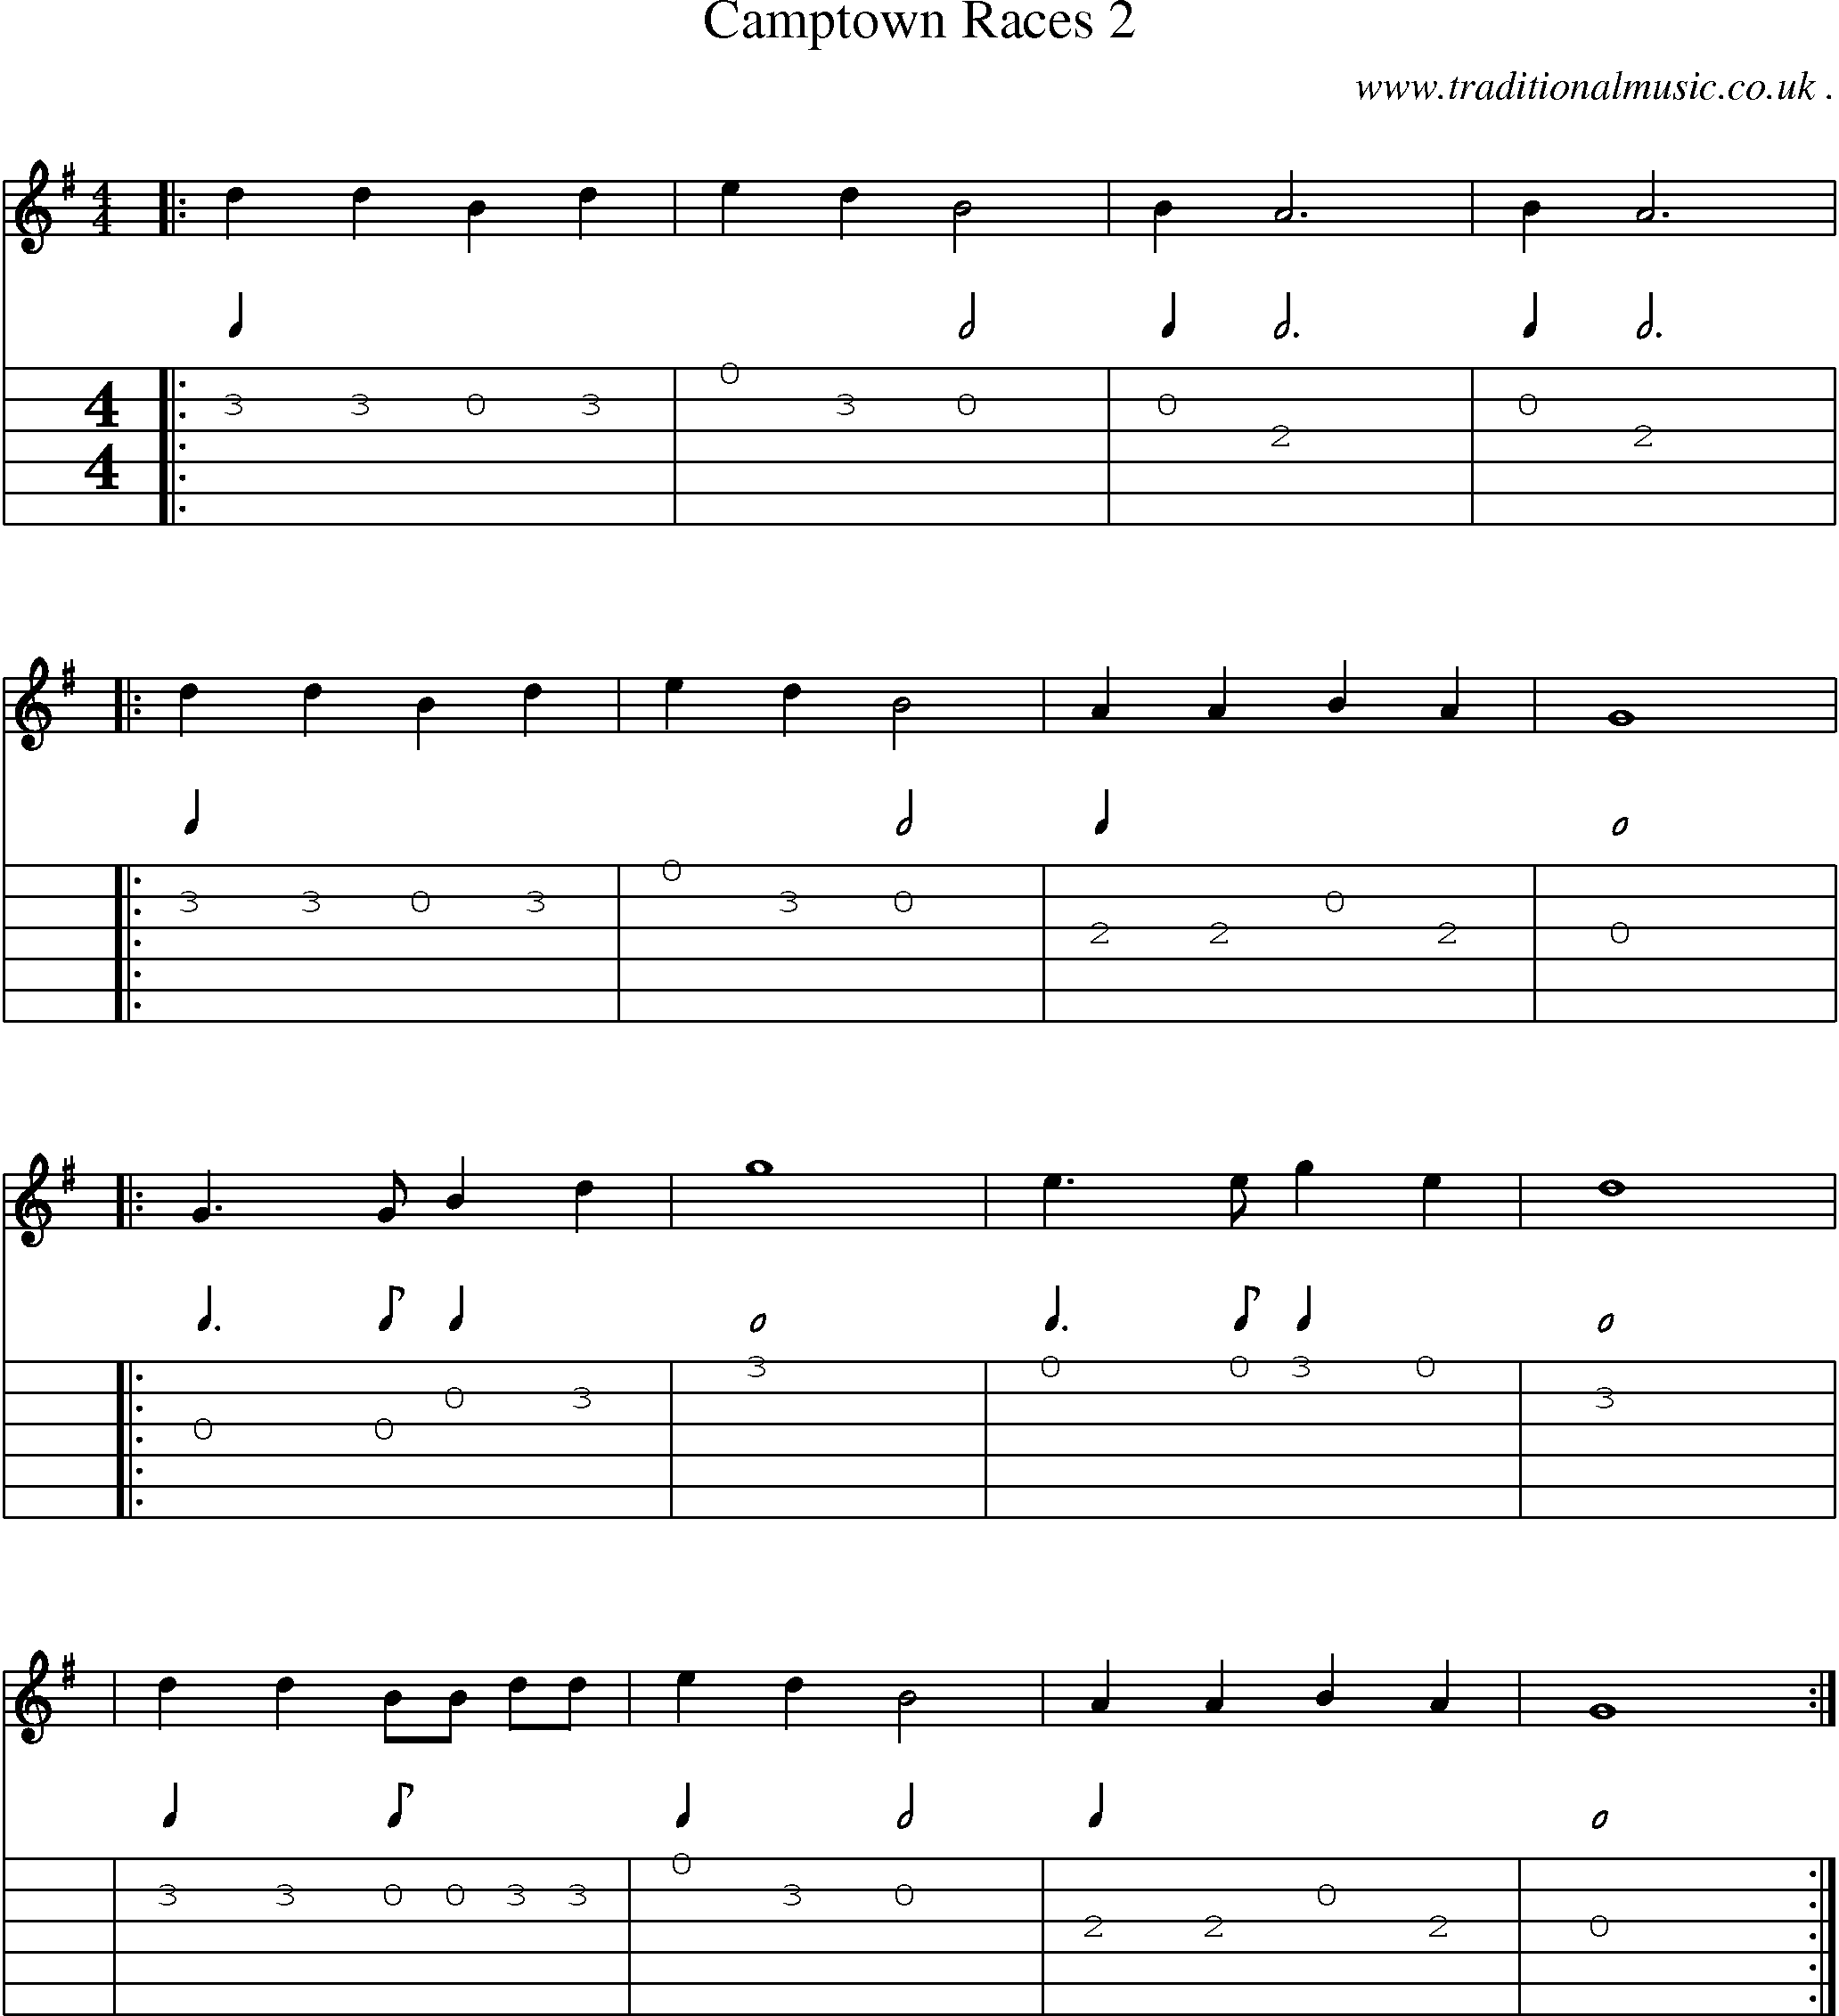 Music Score and Guitar Tabs for Camptown Races 2